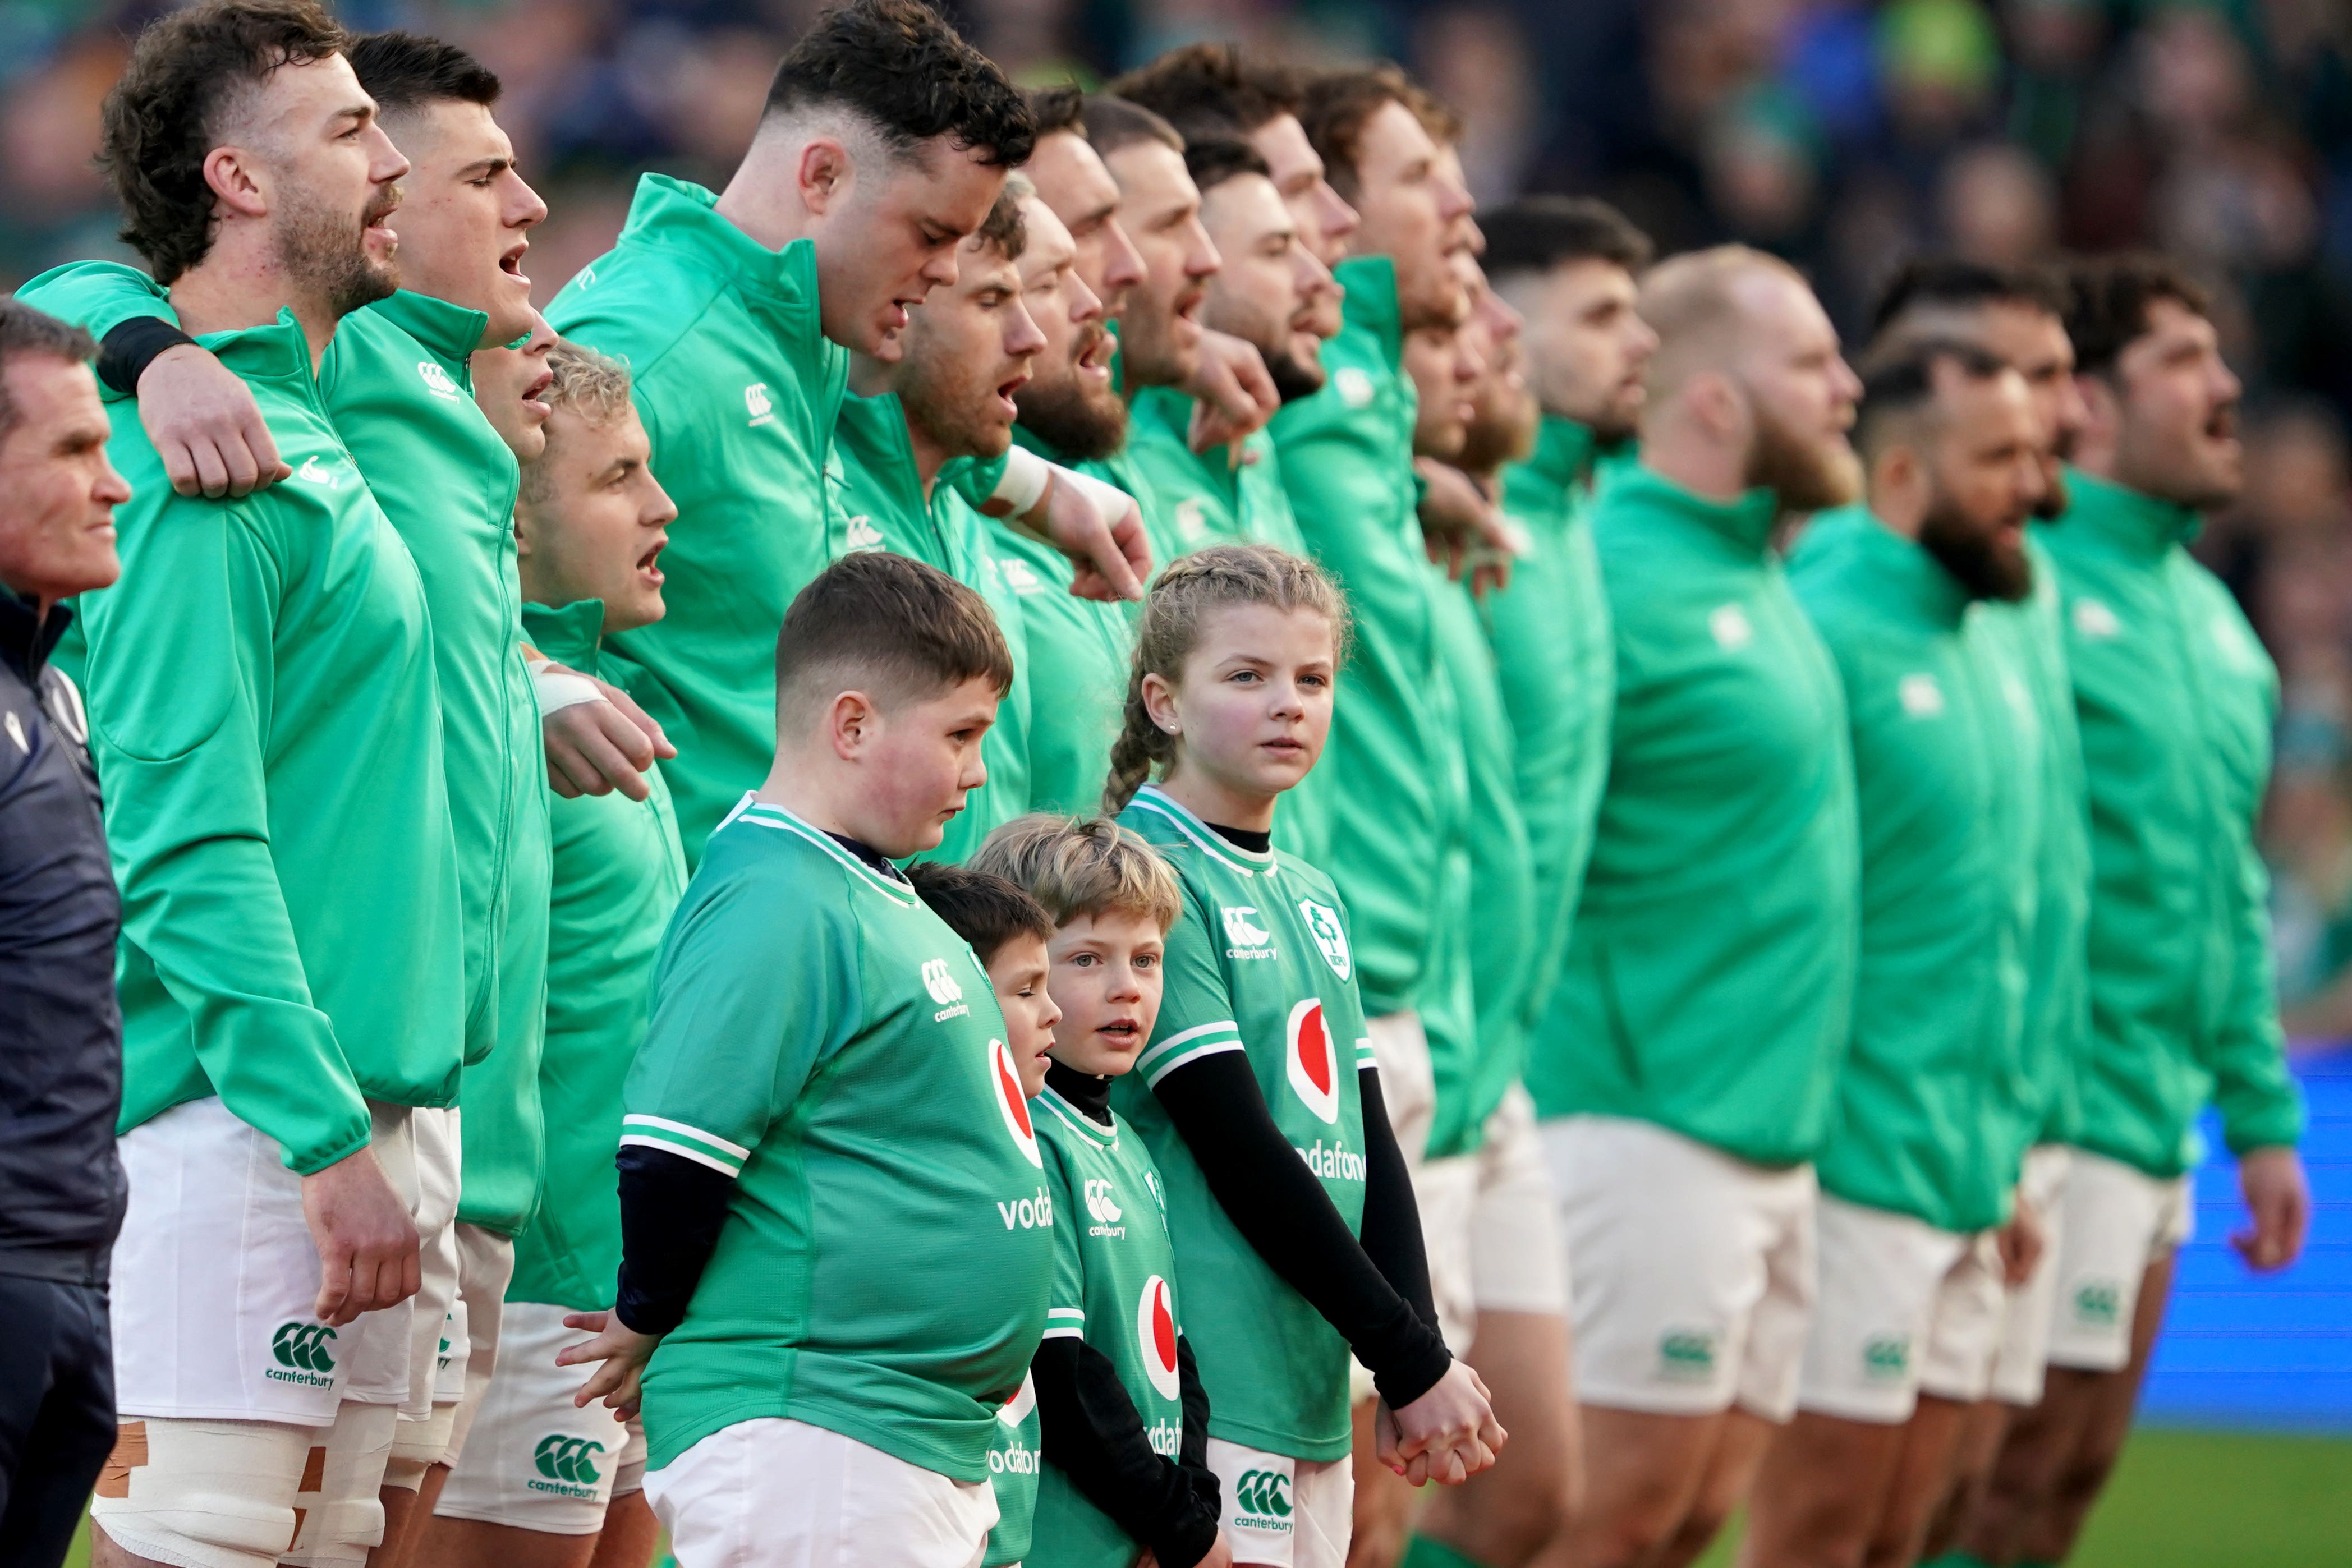 Stevie Mulrooney, not pictured, attracted attention for his performance of Ireland’s Call ahead of Sunday’s Six Nations match against Italy (Brian Lawless/PA)